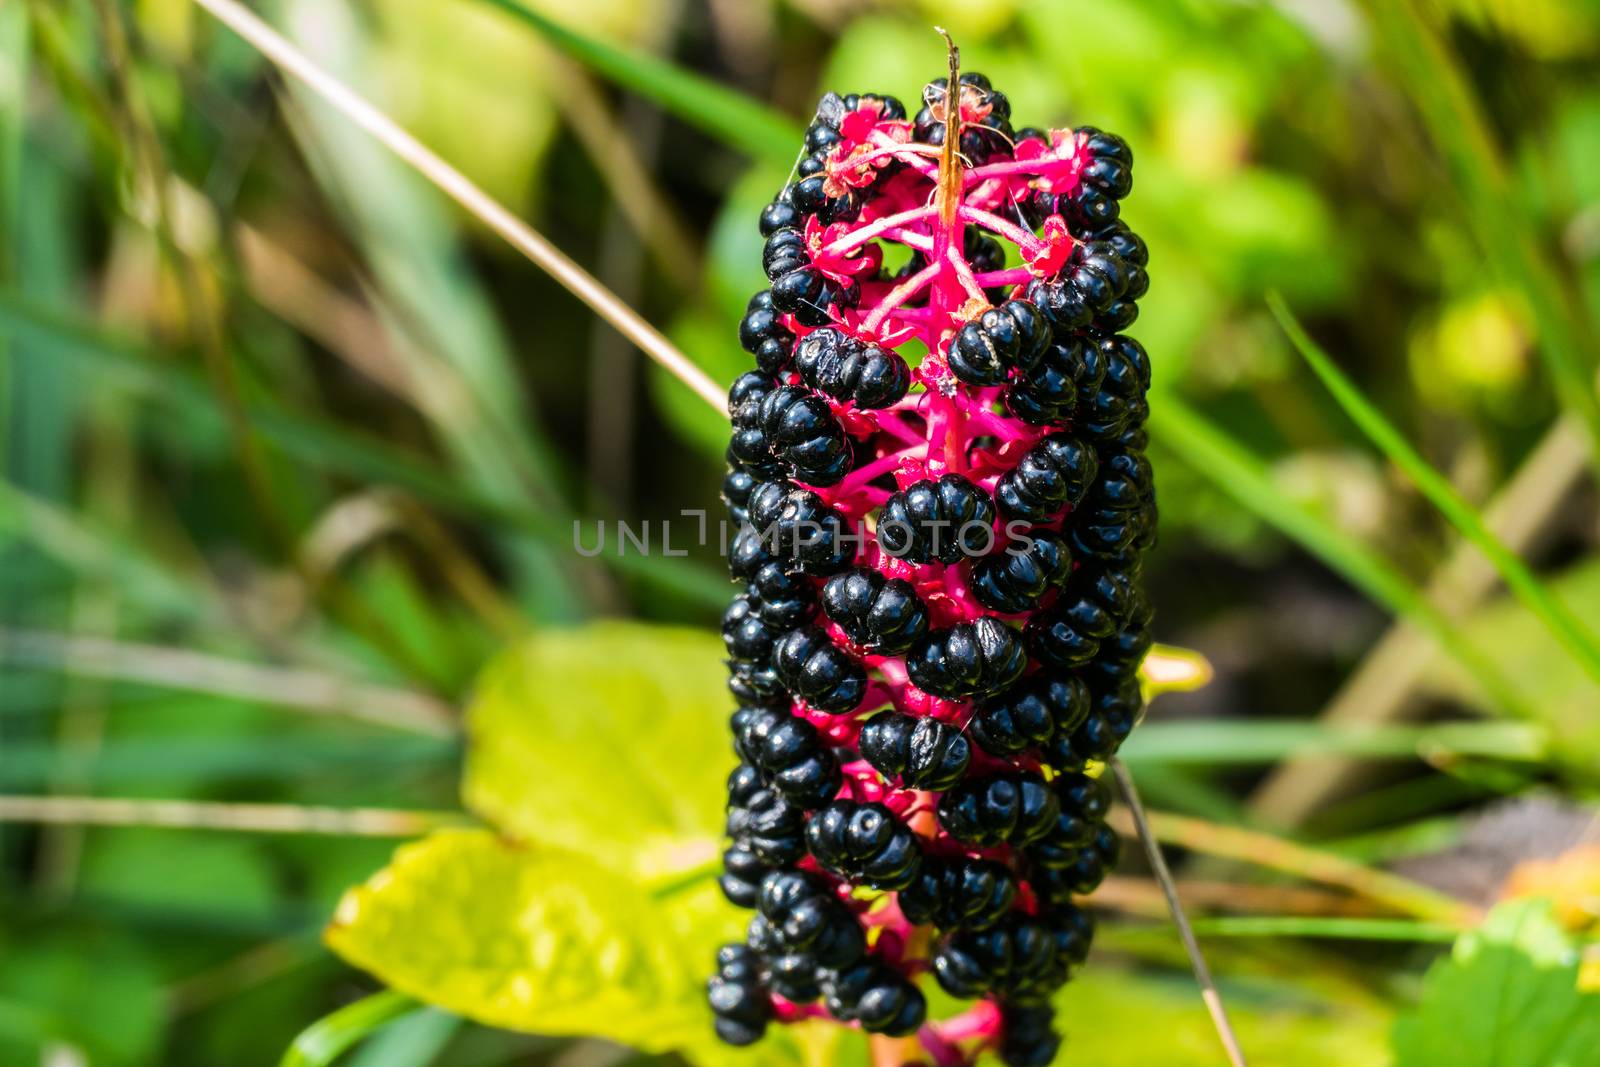 Mysterious flower with black fruits of summer 2016